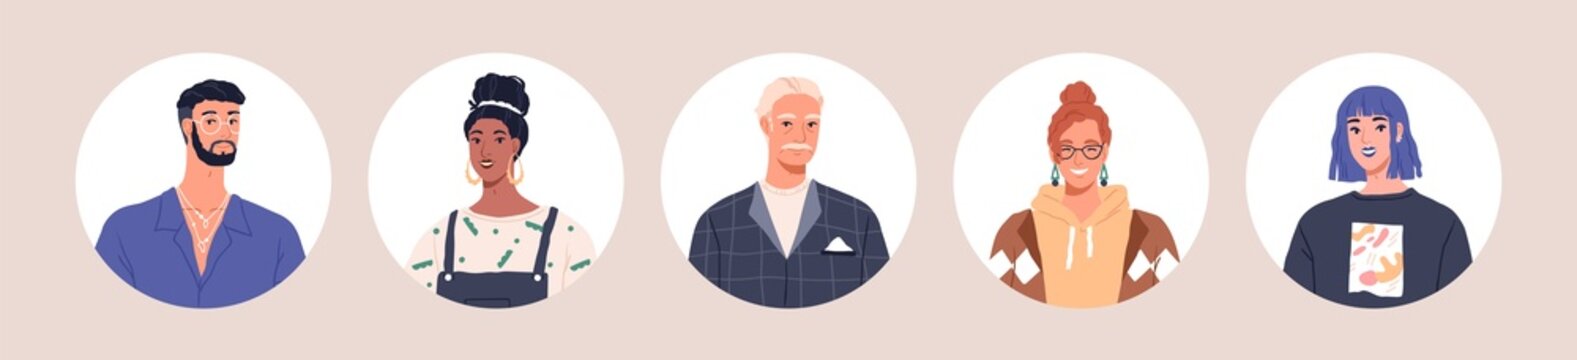 Diverse characters avatars set. Face portraits of users. Different men and women with positive emotions. Happy smiling young and elderly people heads in circles. Colored flat vector illustrations